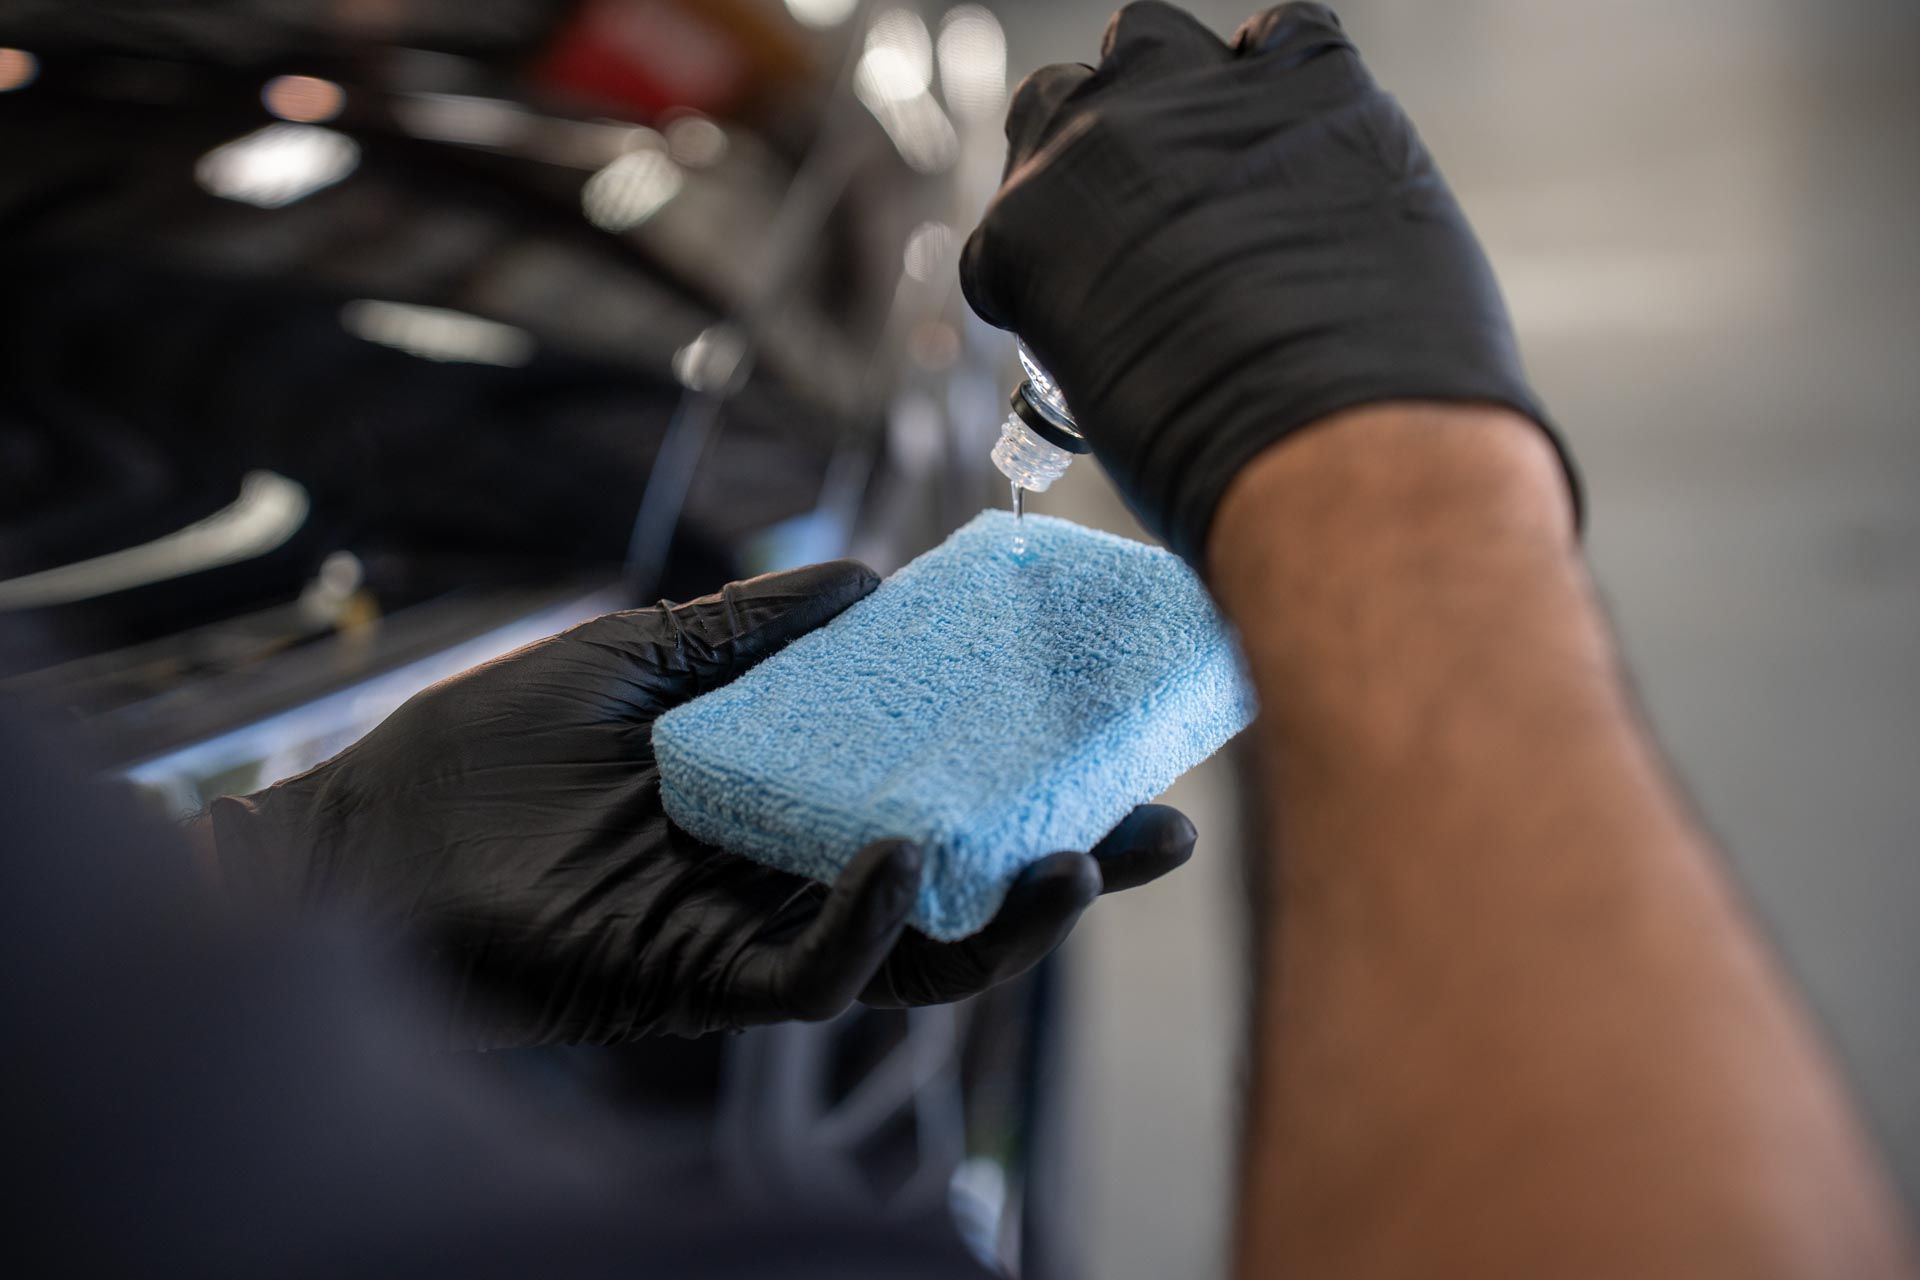 Ceramic Coating - a person wearing black gloves is holding a blue sponge